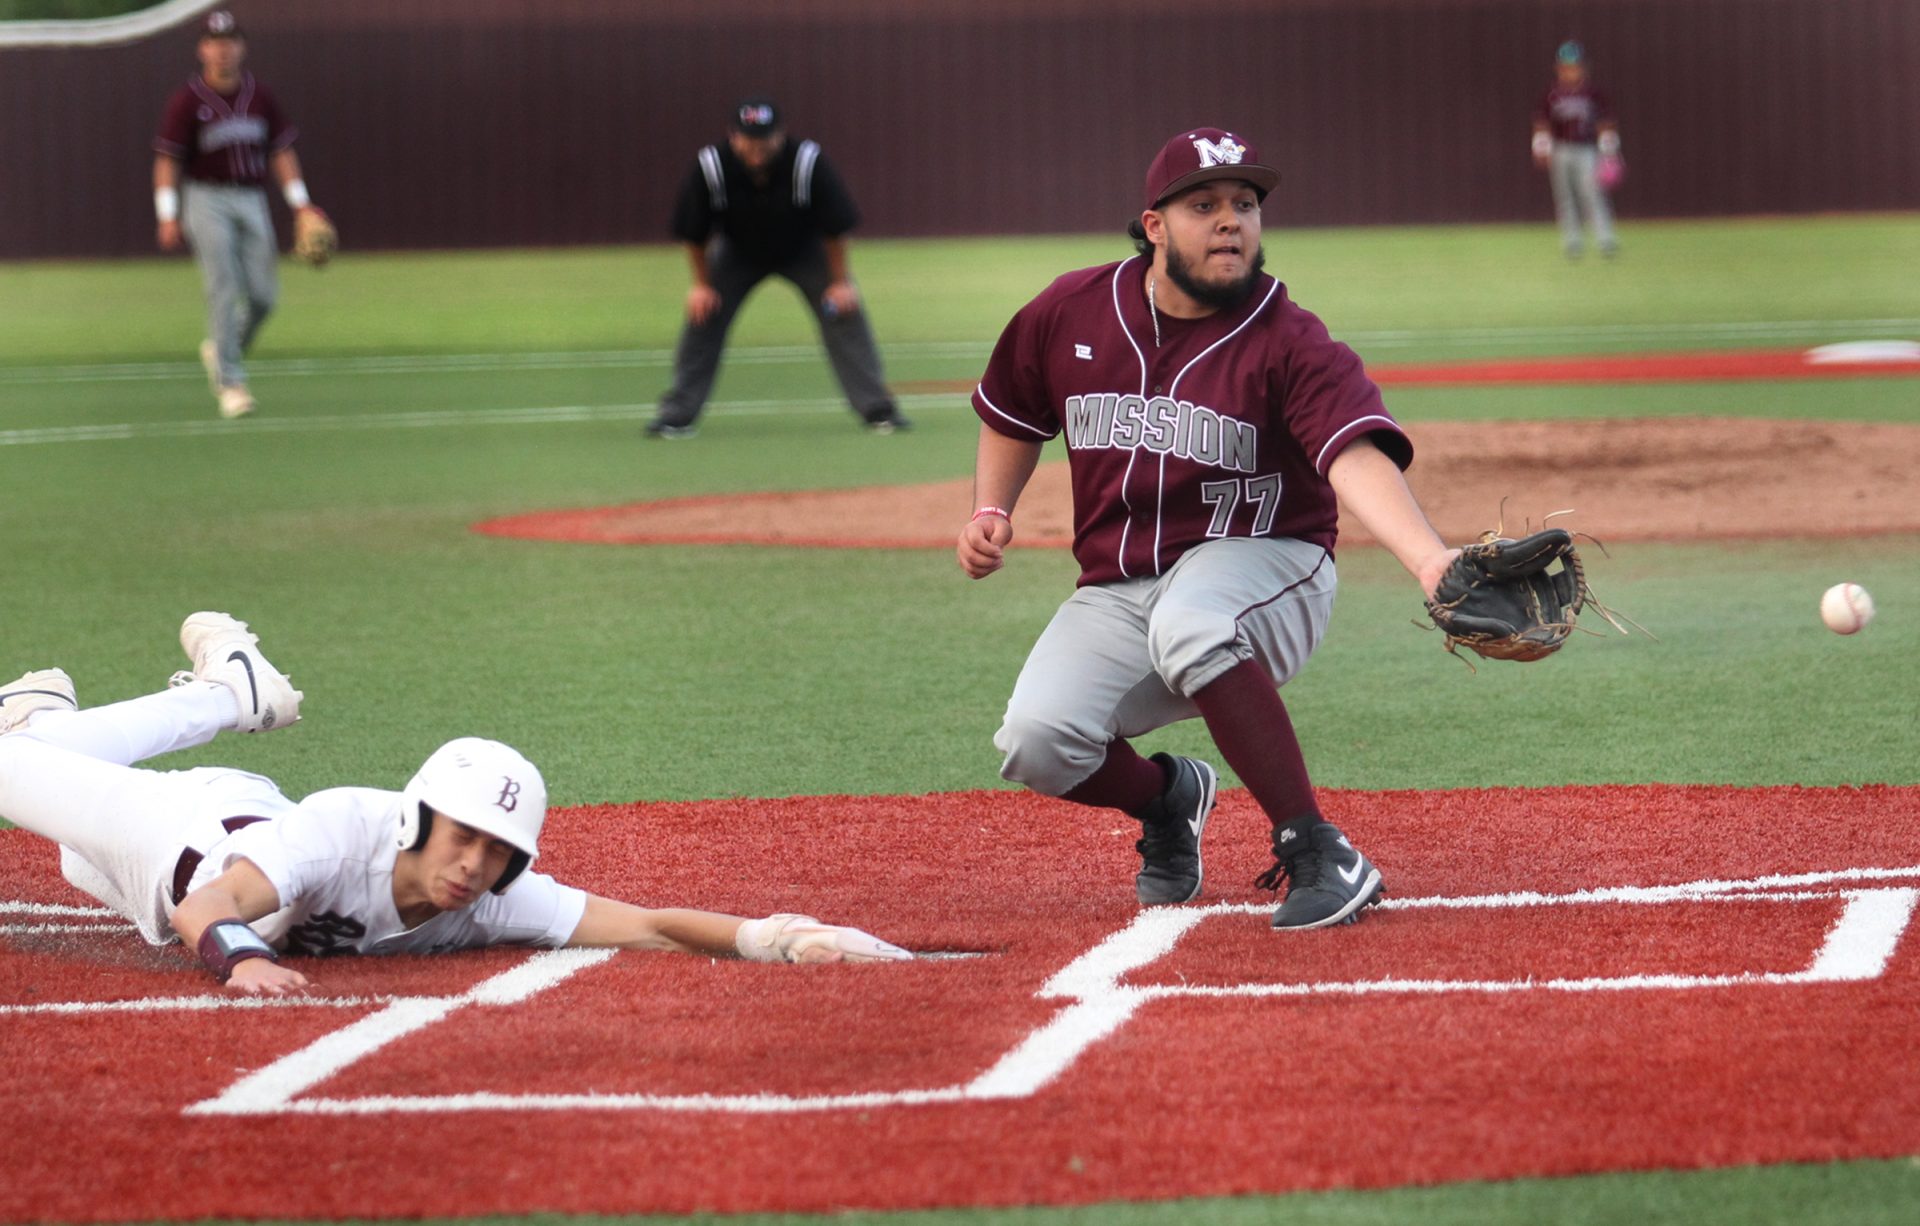 PSJA tops Mission, wins third straight district title